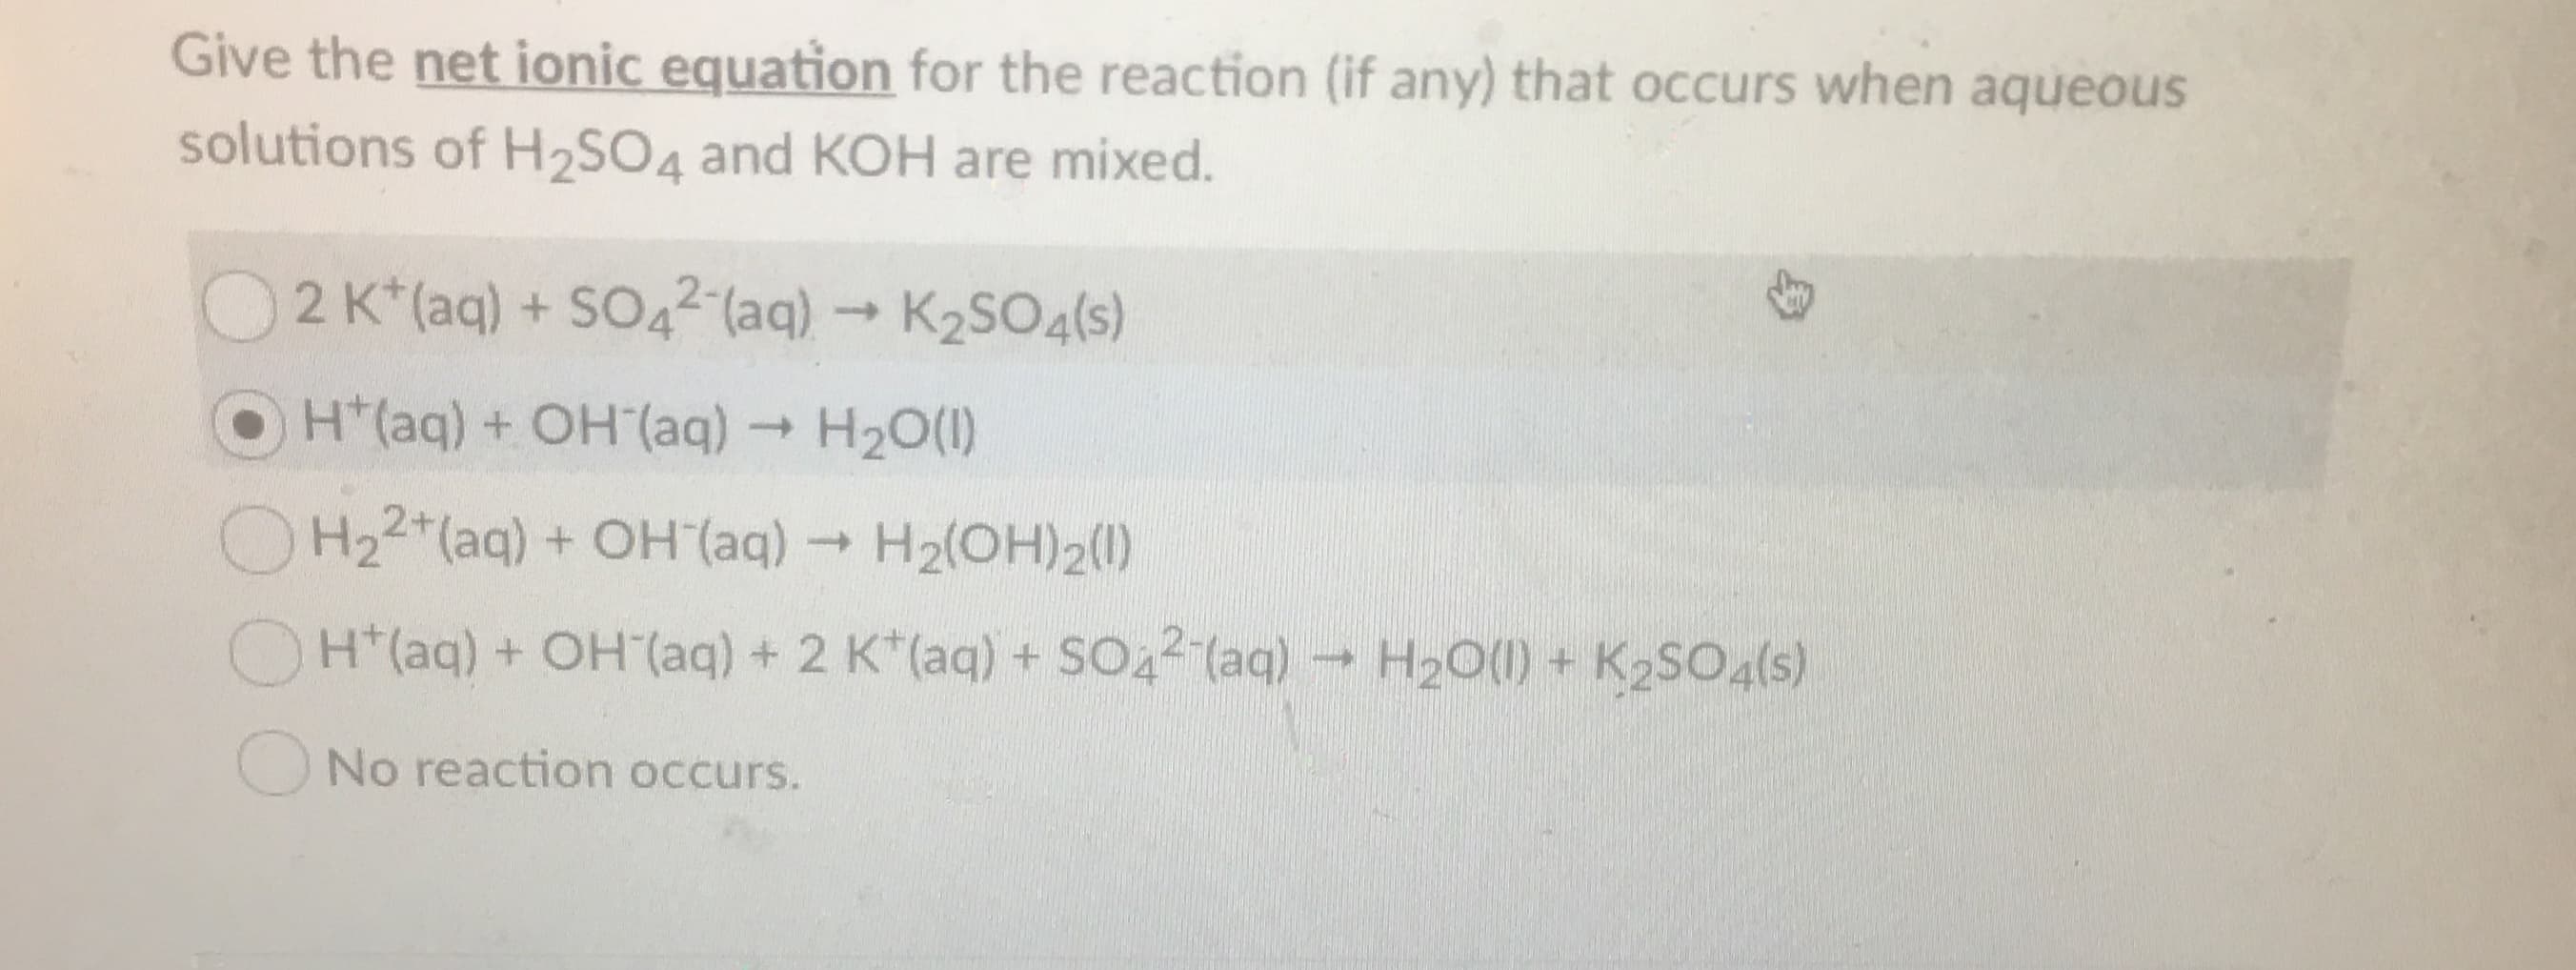 Give the net ionic equation for the reaction (if any) that occurs when aqueous
solutions of H2SO4 and KOH are mixed.
2 K*(aq) + SO42(aq)K2SO4(s)
OH(aq) + OH (aq)H20()
H22 (aq) +OH (aq)H2(OH)2()
H20()+ K2SO4(s)
H(aq) +OH (aq) + 2 K (aq) + SO42 (aq)
No reaction occurs.
